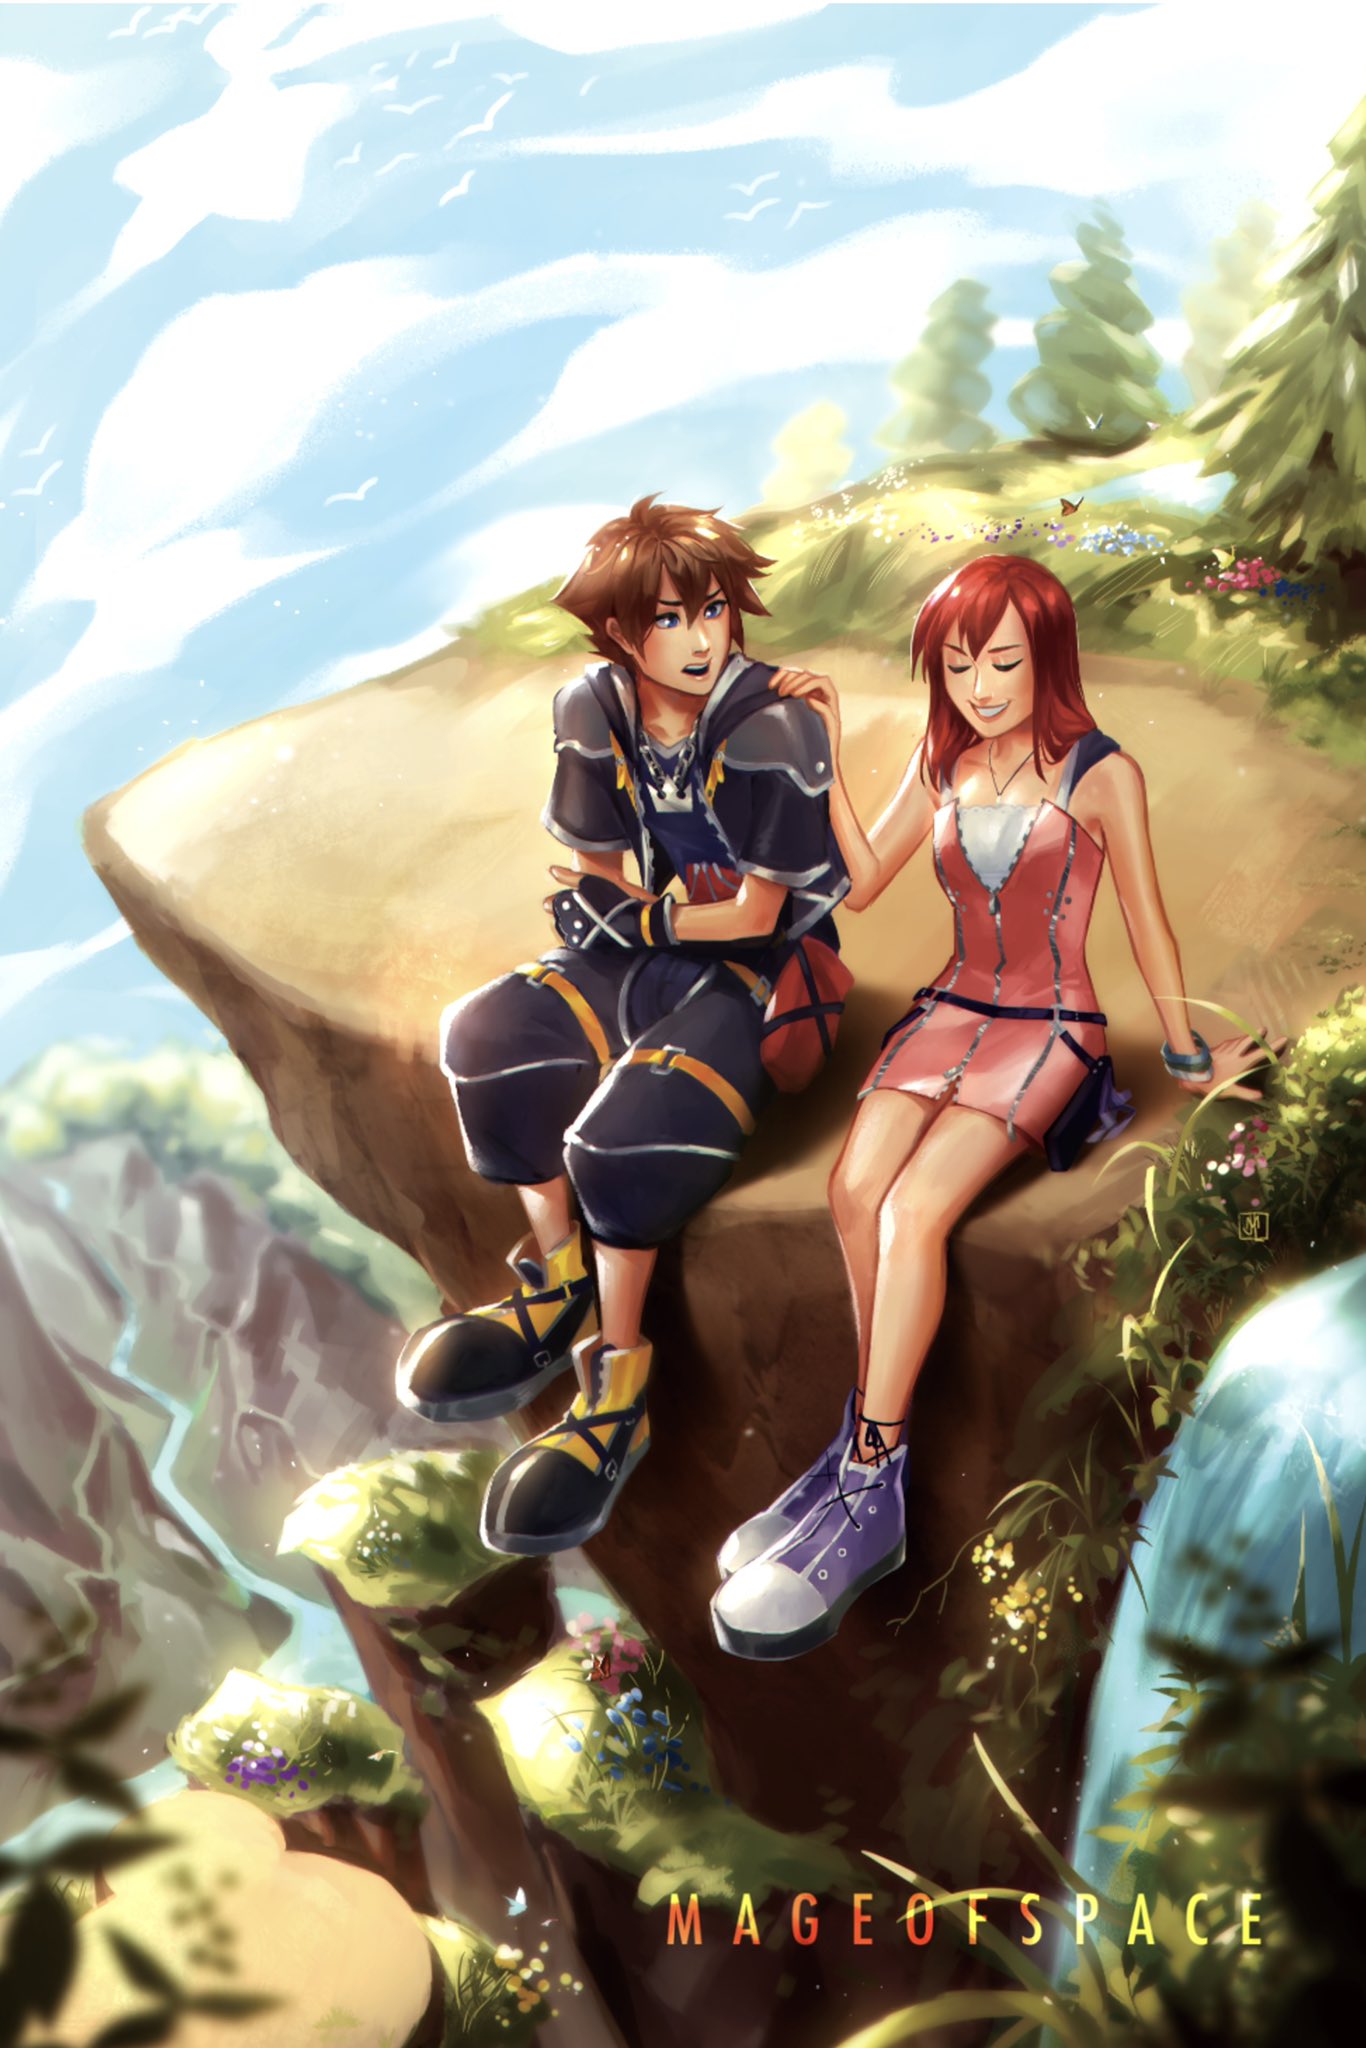 1boy 1girl artist_name bare_shoulders black_gloves breasts brown_hair chain_necklace cliff closed_eyes crossed_arms dress fingerless_gloves flock full_body gloves hair_between_eyes hand_on_another's_shoulder highres jewelry kairi_(kingdom_hearts) kingdom_hearts kingdom_hearts_ii looking_at_another mageofspace medium_hair nature necklace open_mouth outdoors pink_dress redhead short_hair short_sleeves sitting sleeveless sleeveless_dress small_breasts smile sora_(kingdom_hearts) teeth water waterfall wristband